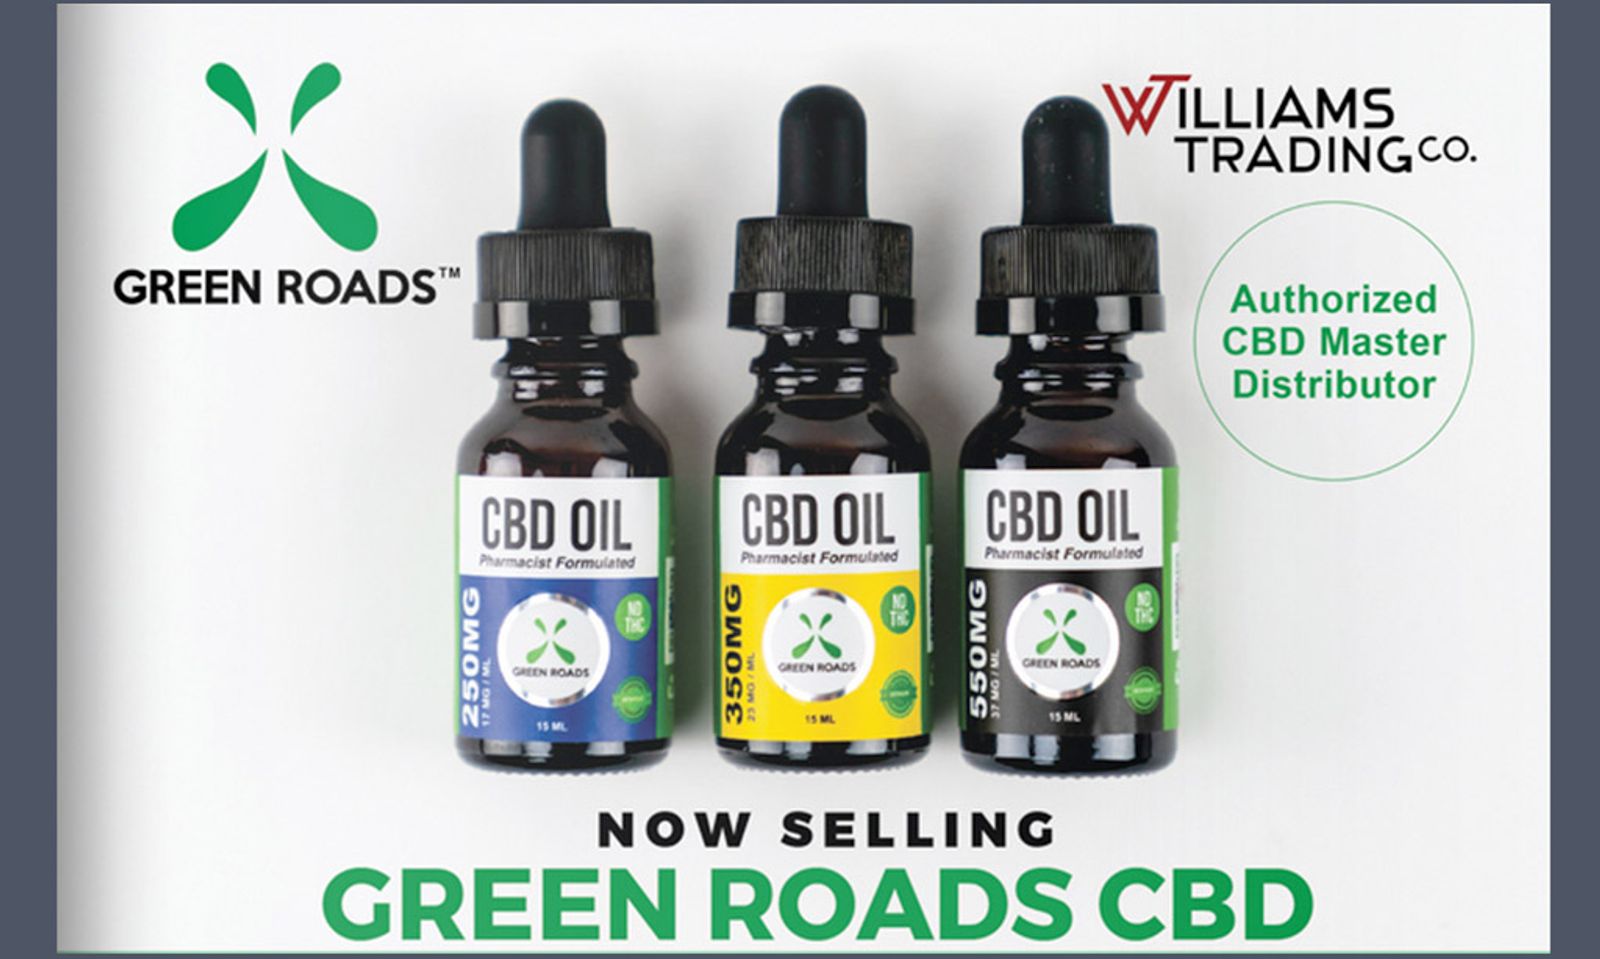 Williams Trading Co Launches Line of Green Roads CBD Products